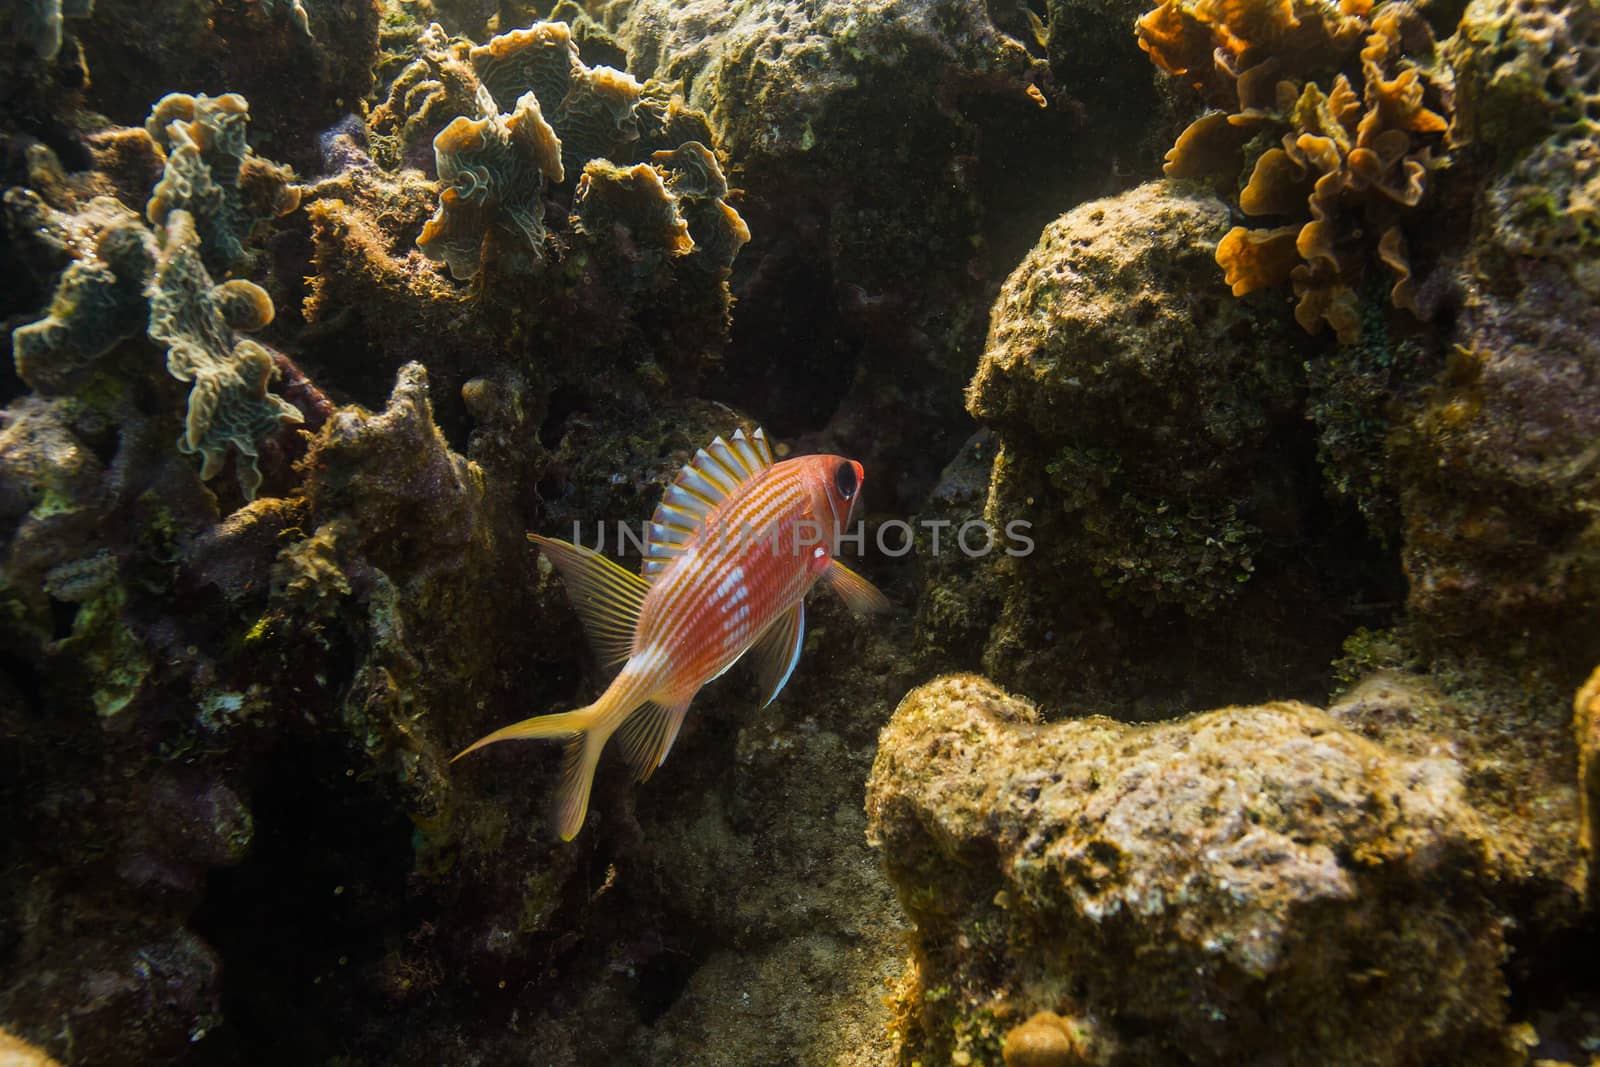 Squirrelfish in a crevace of a coral reef